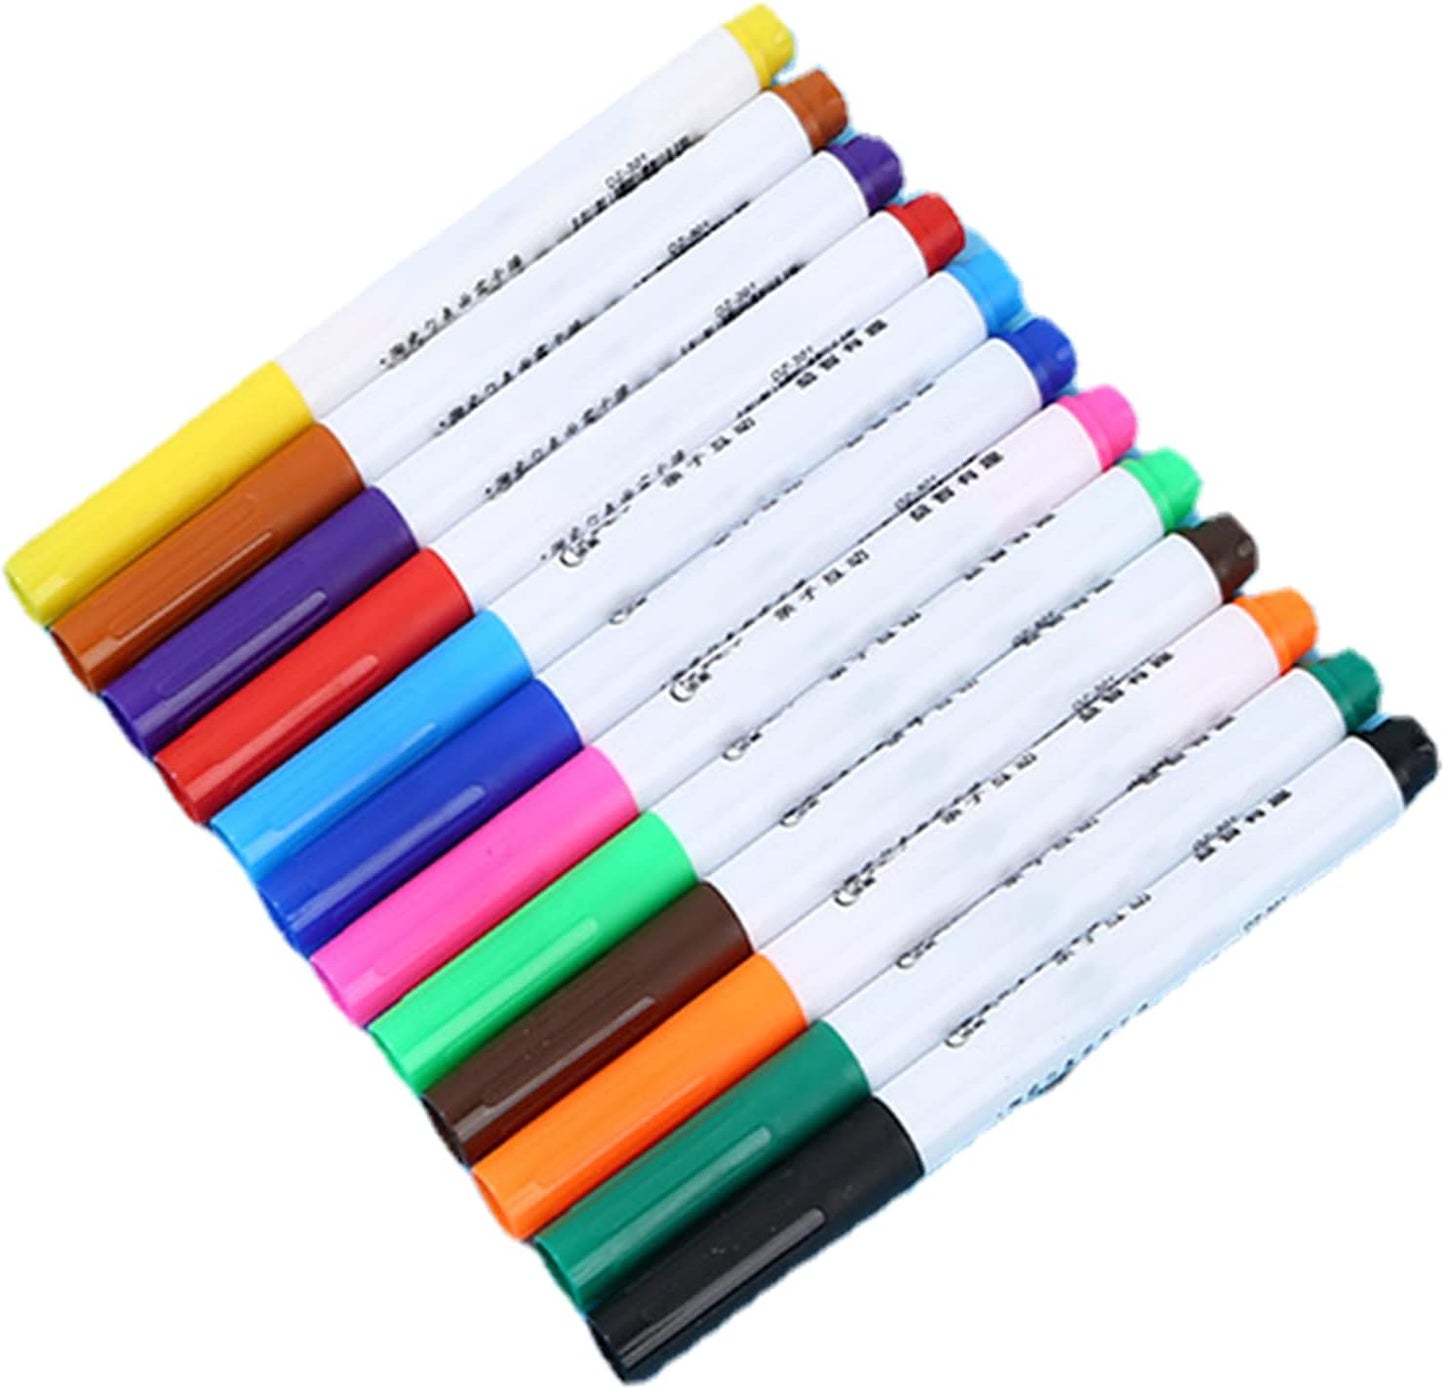 Magical Water Painting Pen - 7-Color Magical Floating Water Painting Pen